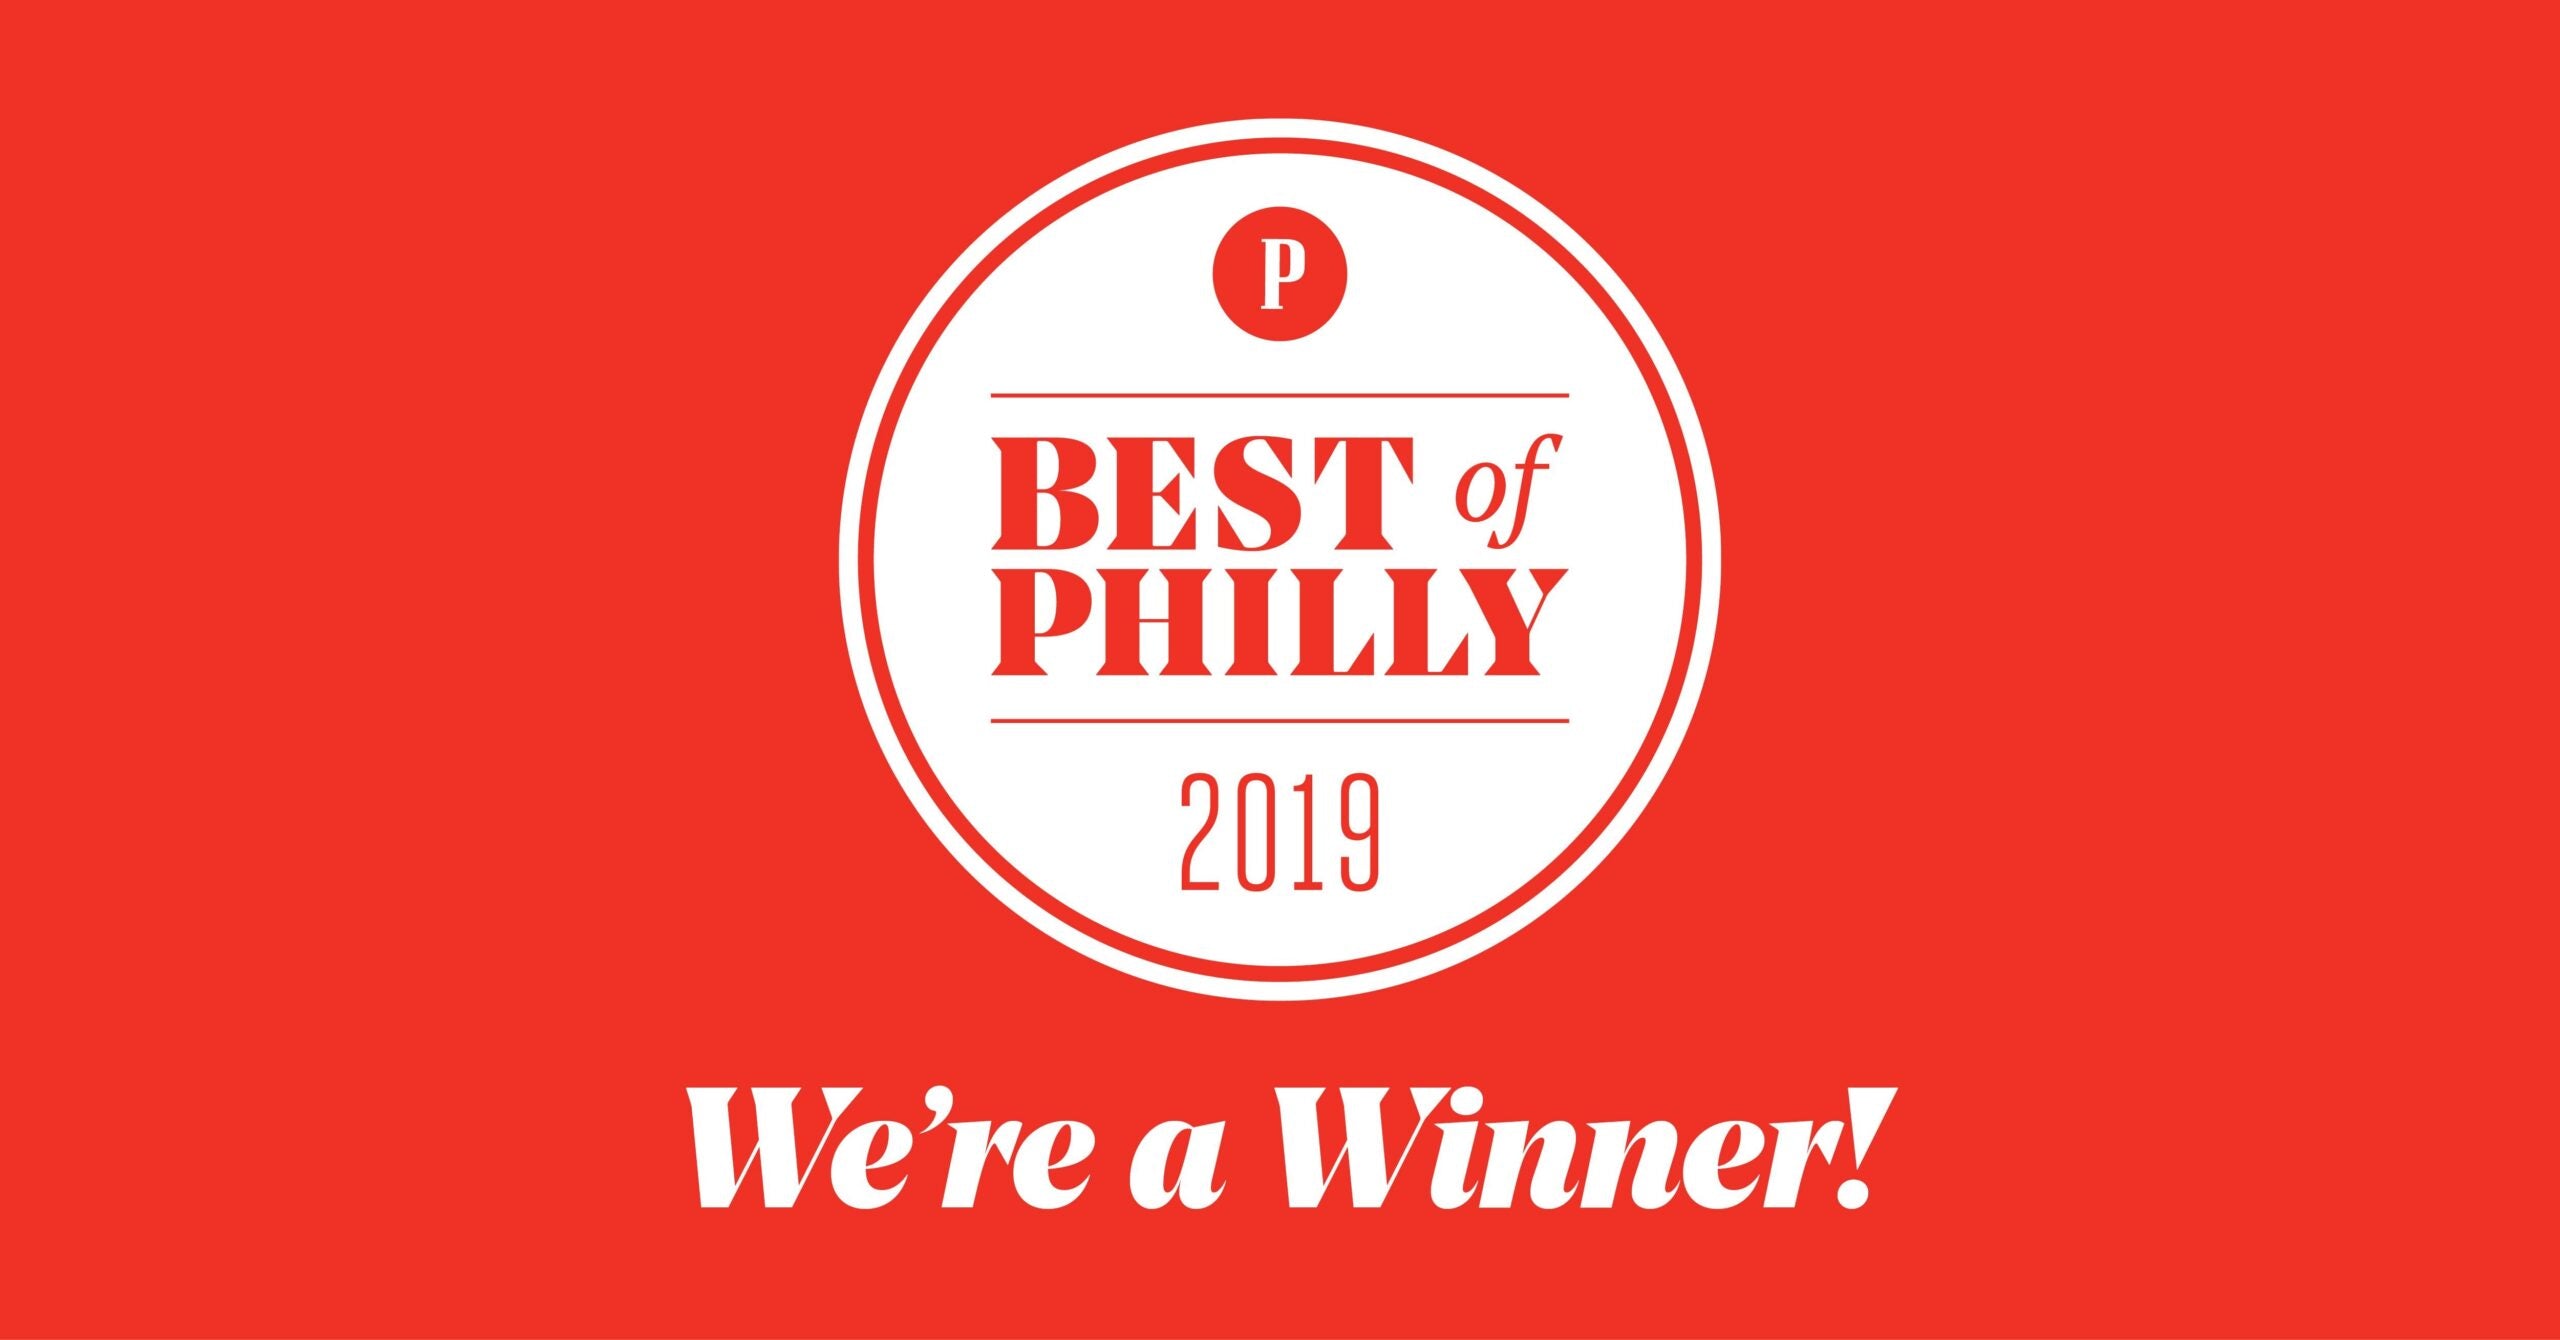 Cunningham Piano is Best of Philly 2019